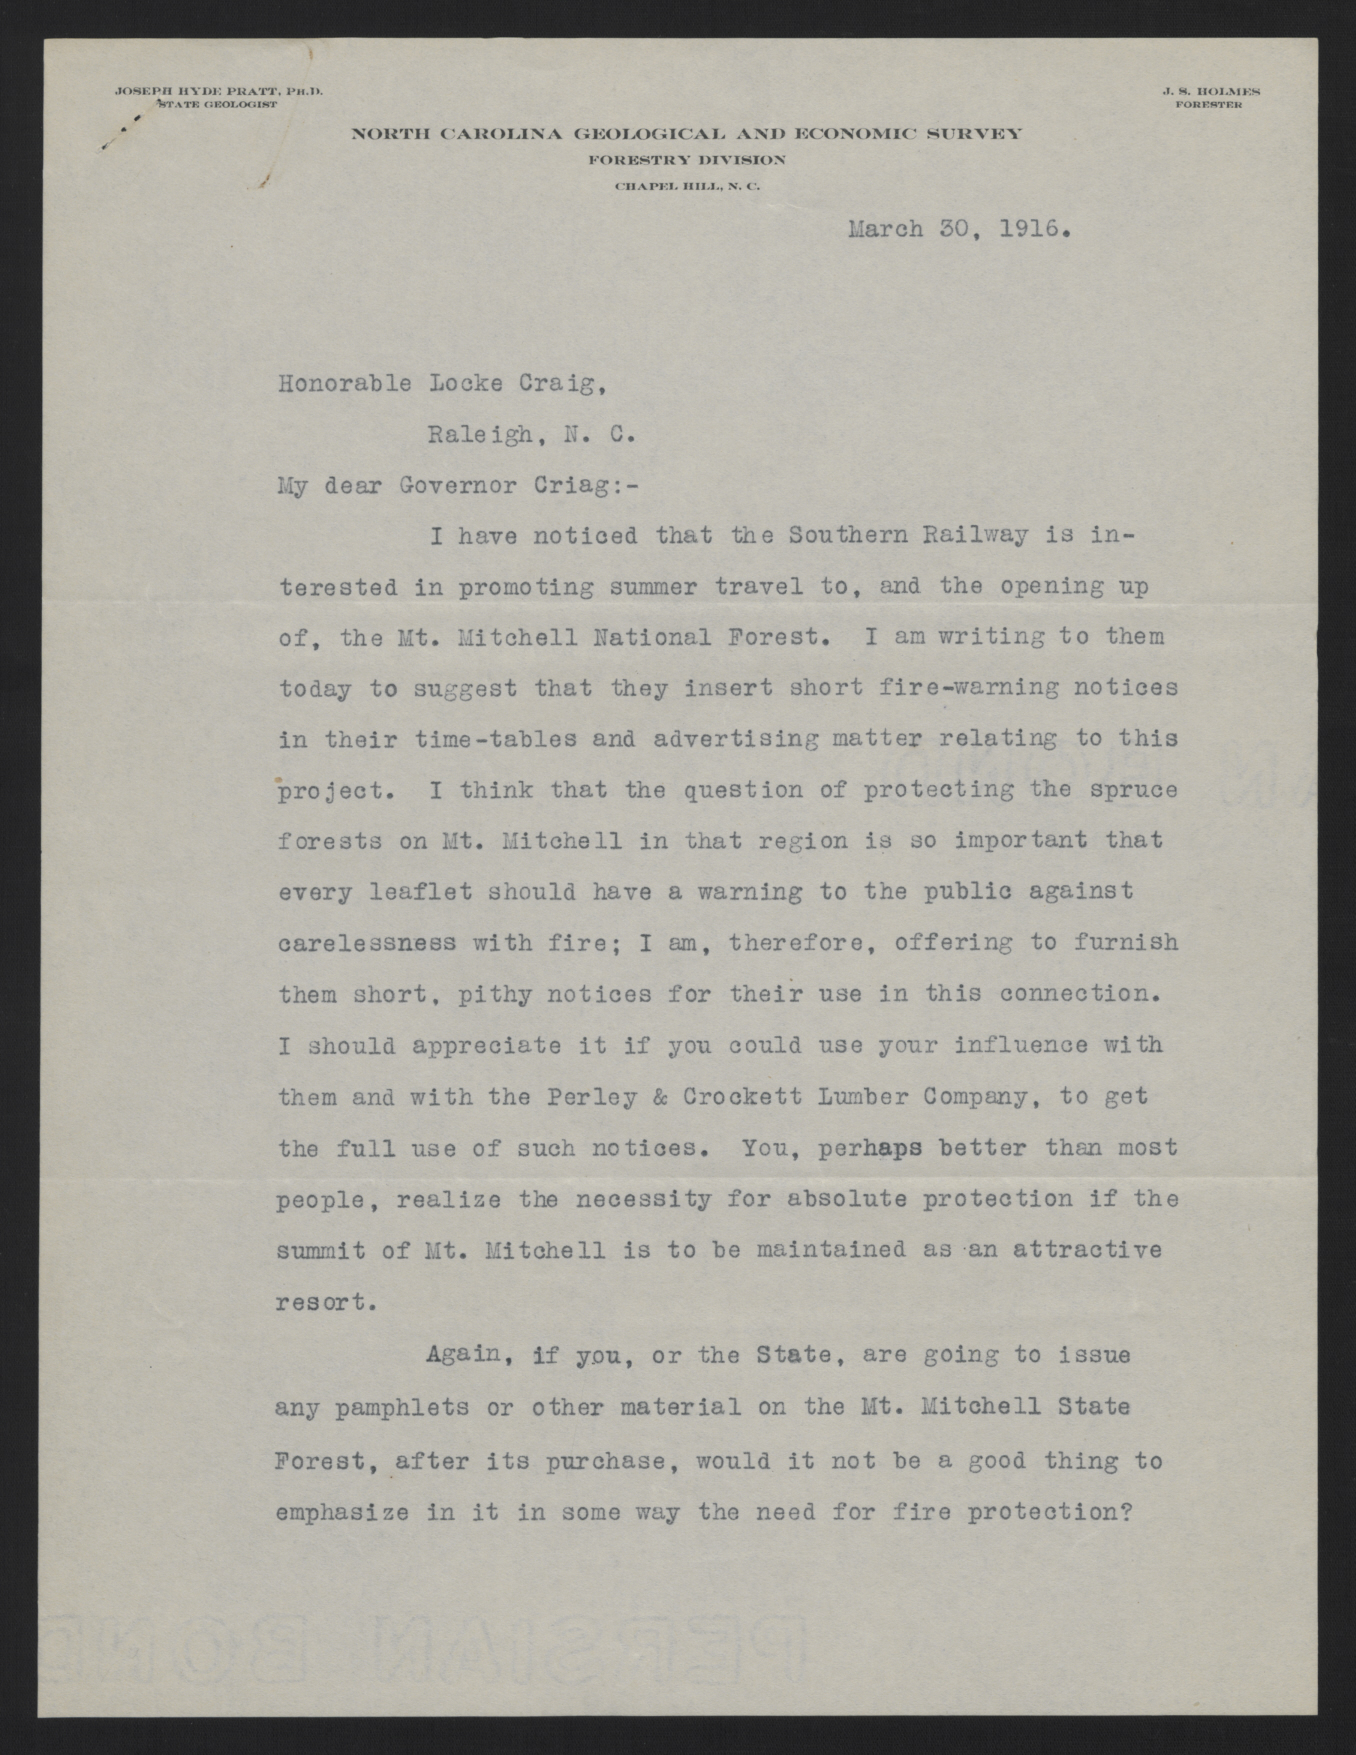 Letter from Holmes to Craig, March 30, 1916, page 1